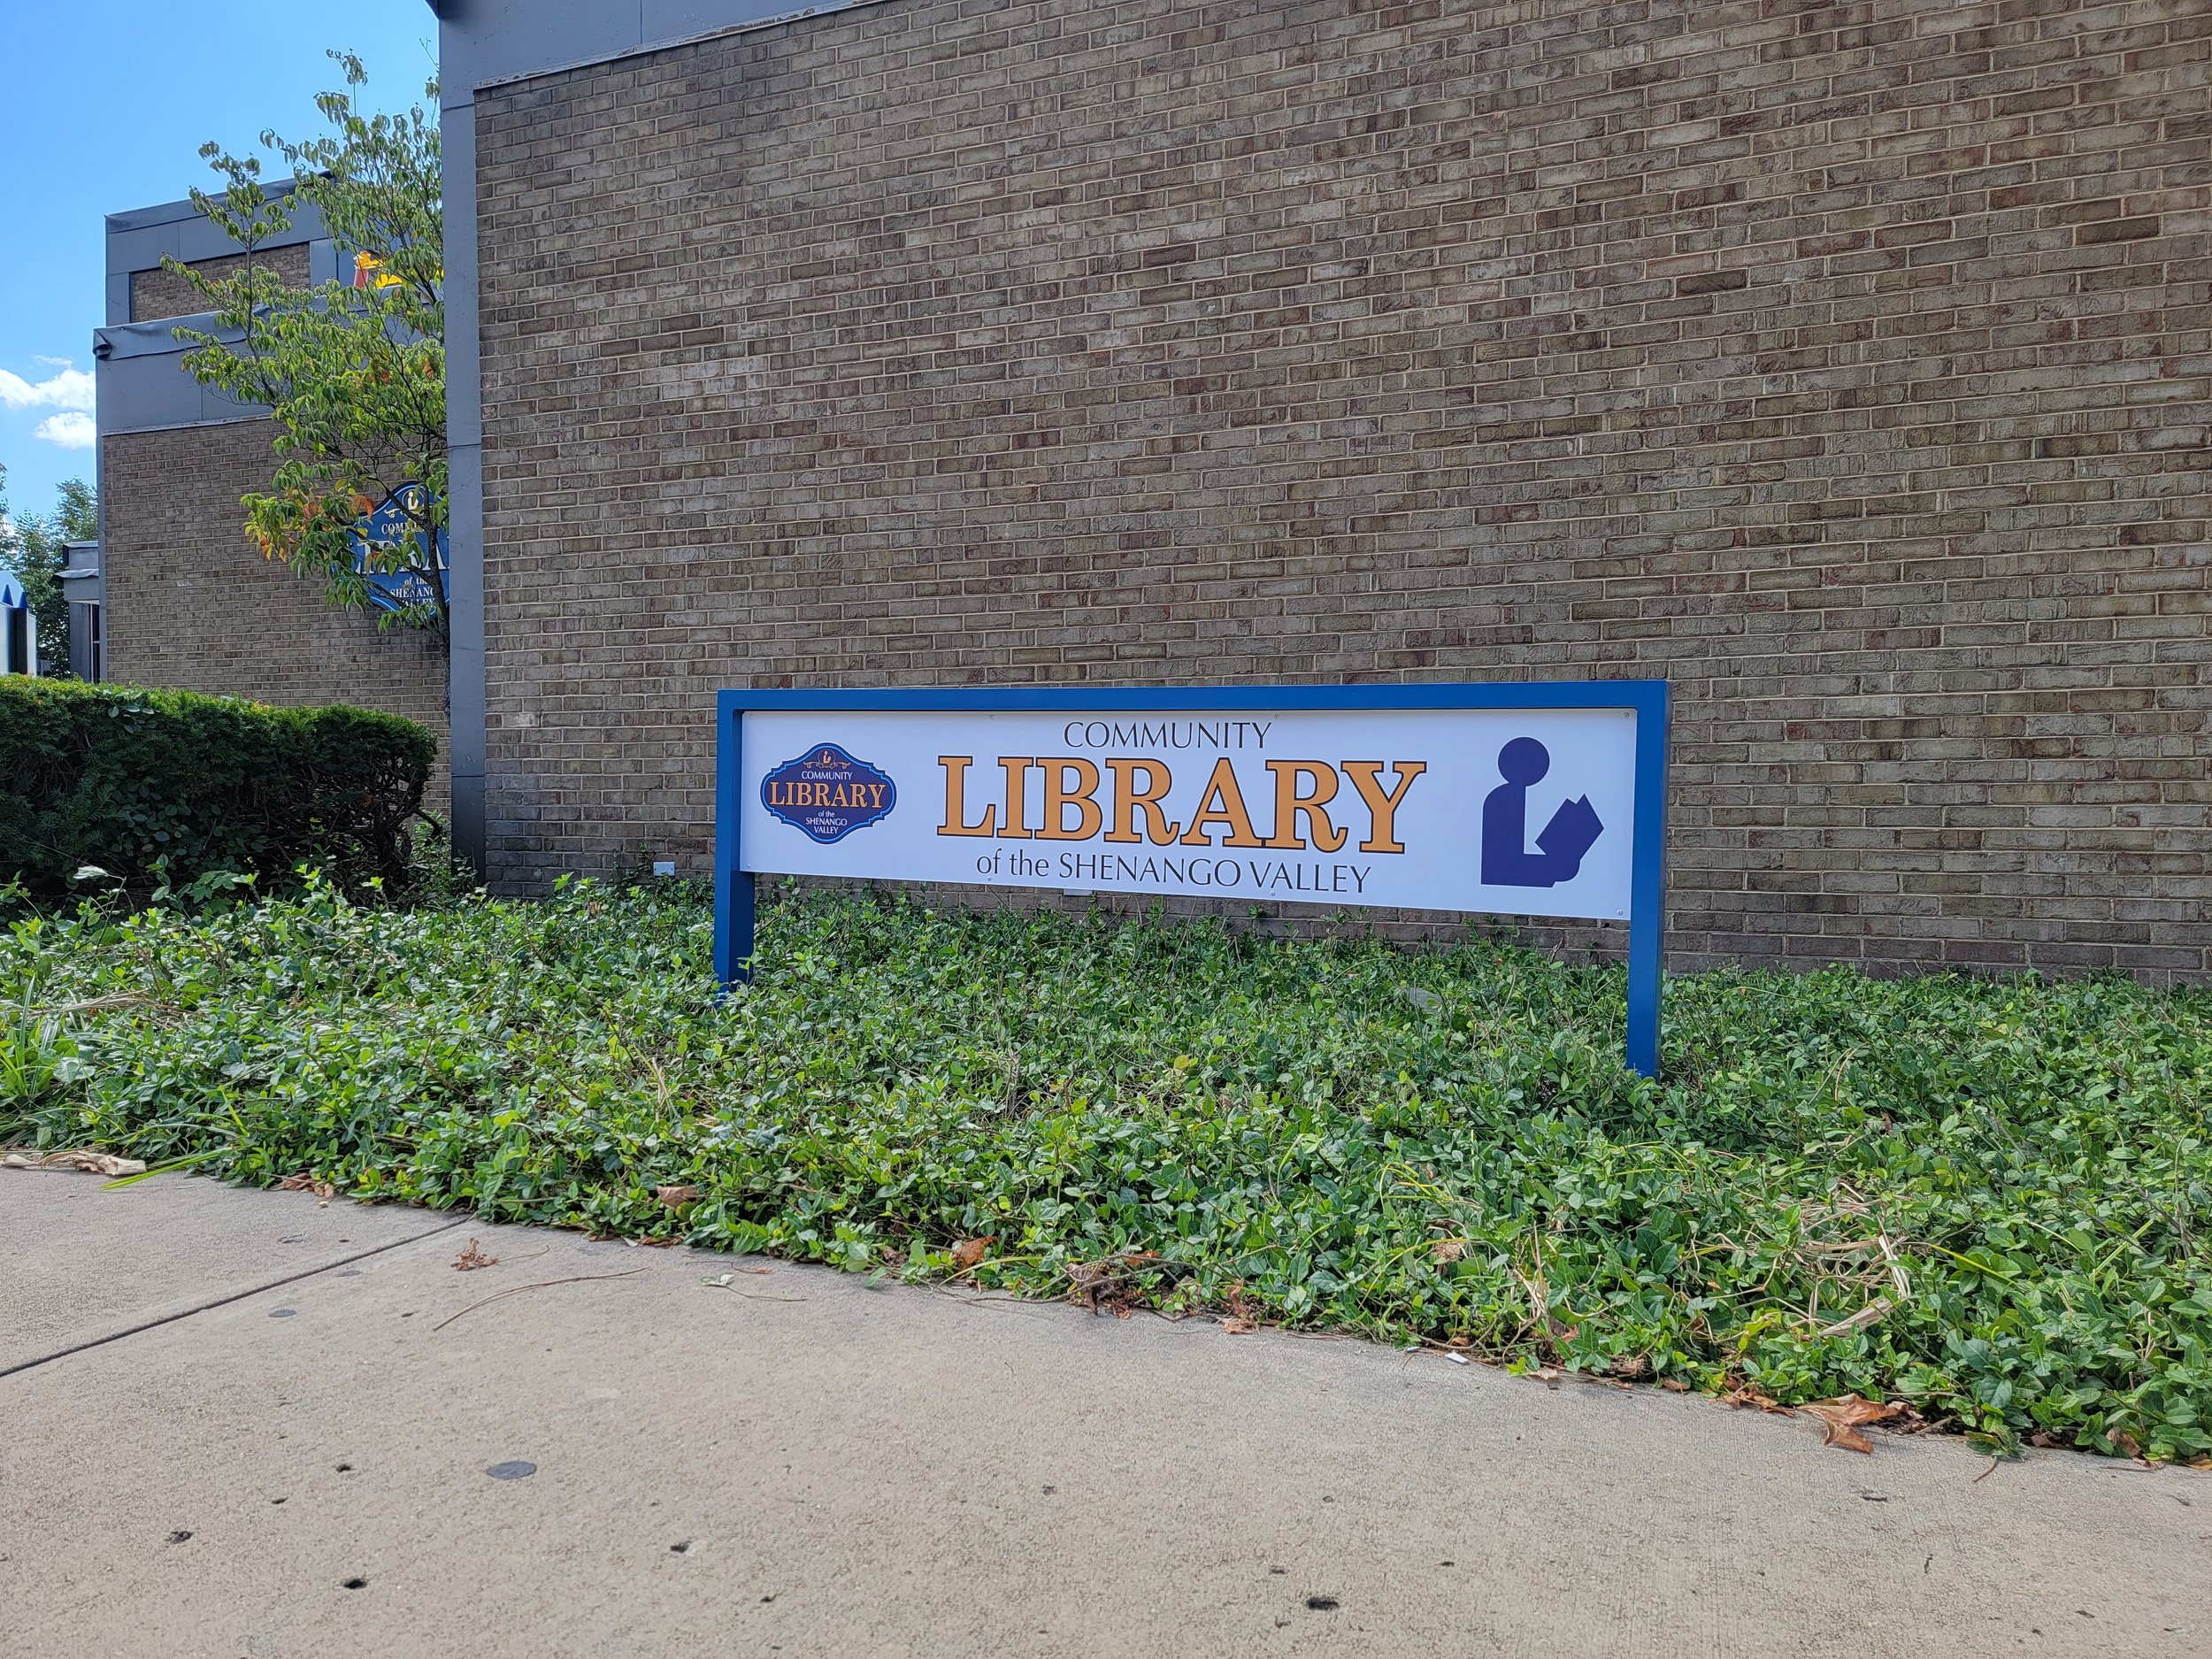 Community Library Panel sign